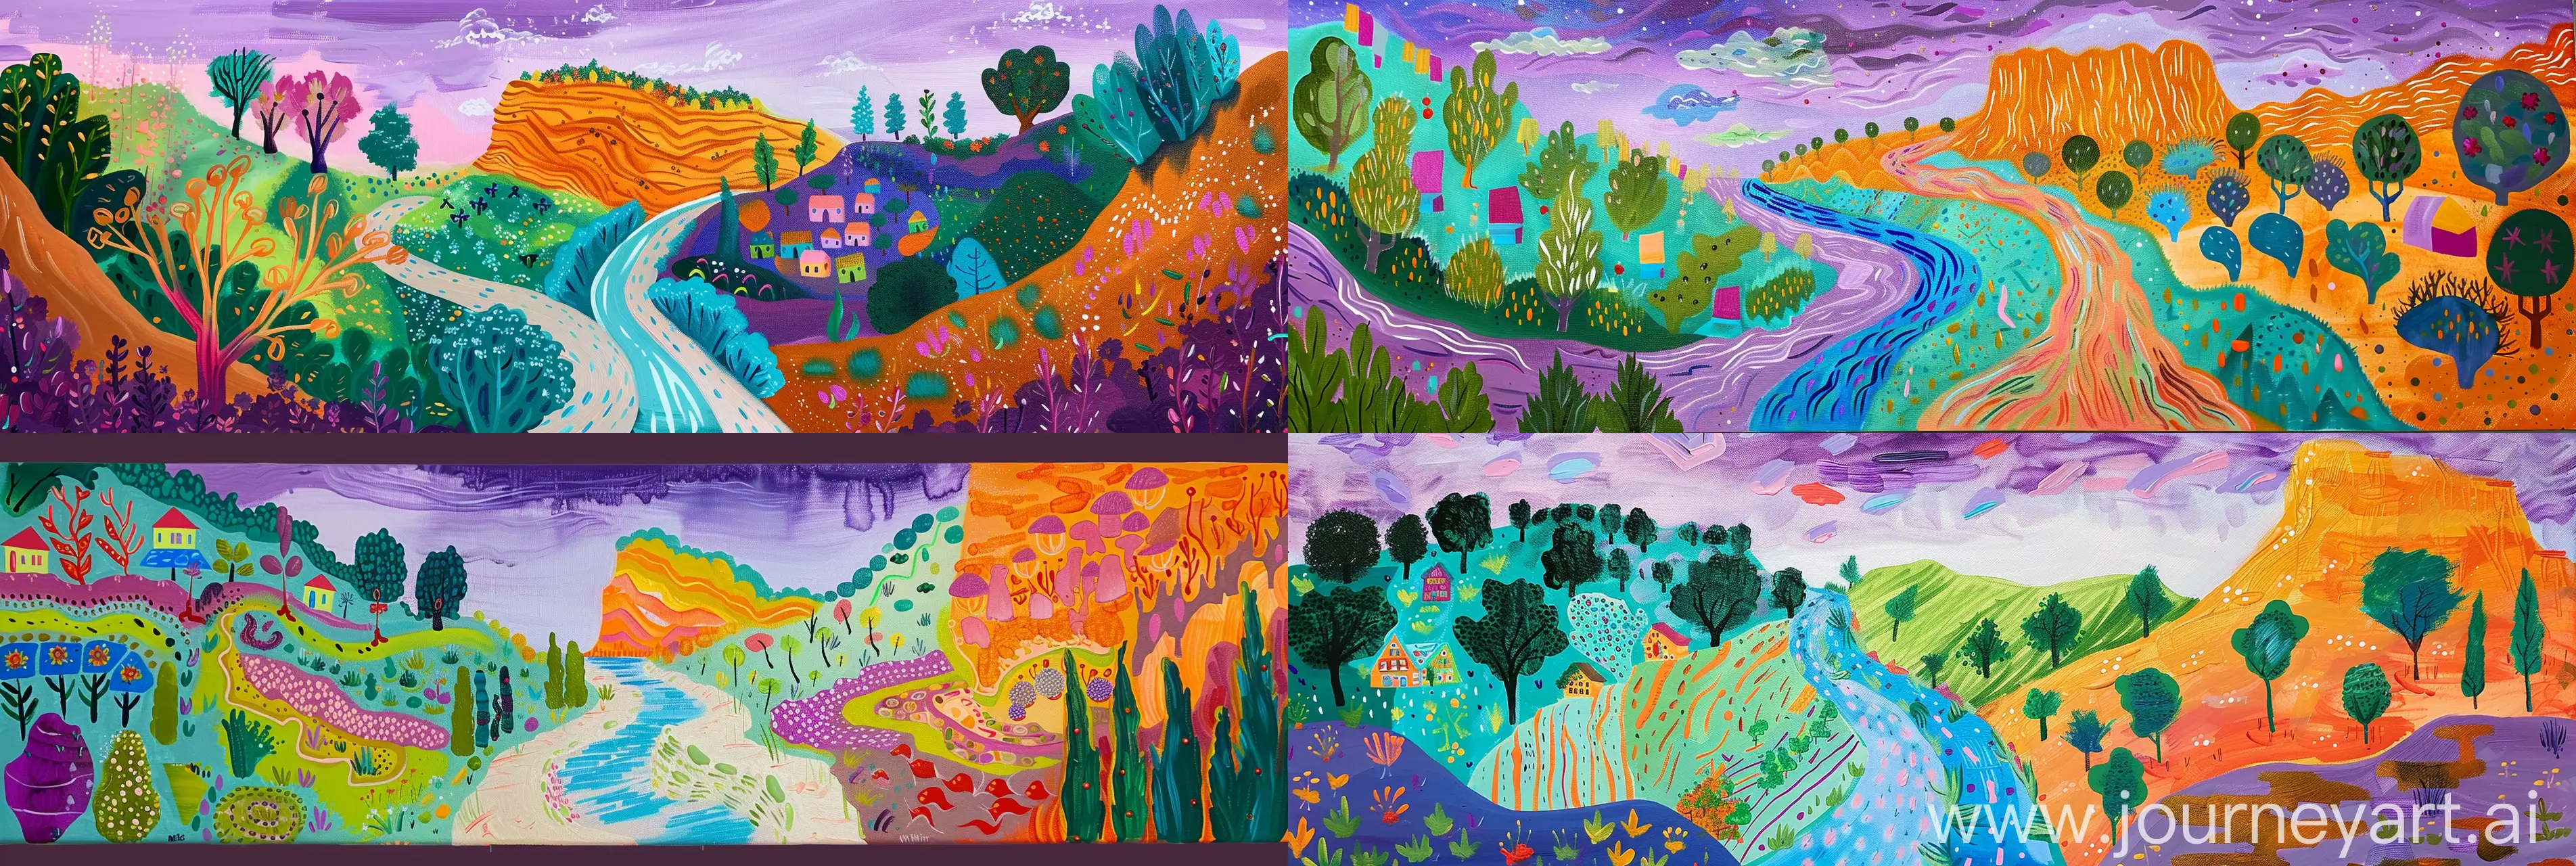 Create a vibrant and colorful painting inspired by the style of "Nichols Canyon" with the same set of colors. Imagine a landscape scene that is expressive and somewhat abstract, using bold and bright colors throughout. Picture a winding river or road as the focal point of the composition, surrounded by various forms of vegetation and trees. On one side of the river, include a steep green hill or cliff with trees or bushes, while the other side features a flatter landscape with small colorful buildings resembling a village. Incorporate a large, rounded hill or mountain in the background, painted in a warm orange hue. Use a mix of purple and blue for the sky, with white strokes to represent clouds. Experiment with patterns and textures to add depth and visual interest to the painting. Remember to maintain the whimsical and dream-like quality of the original artwork while infusing your own creativity and interpretation. Use acrylic paint on a canvas to capture the essence of the style and create a unique piece inspired by "Nichols Canyon." --ar 12:4